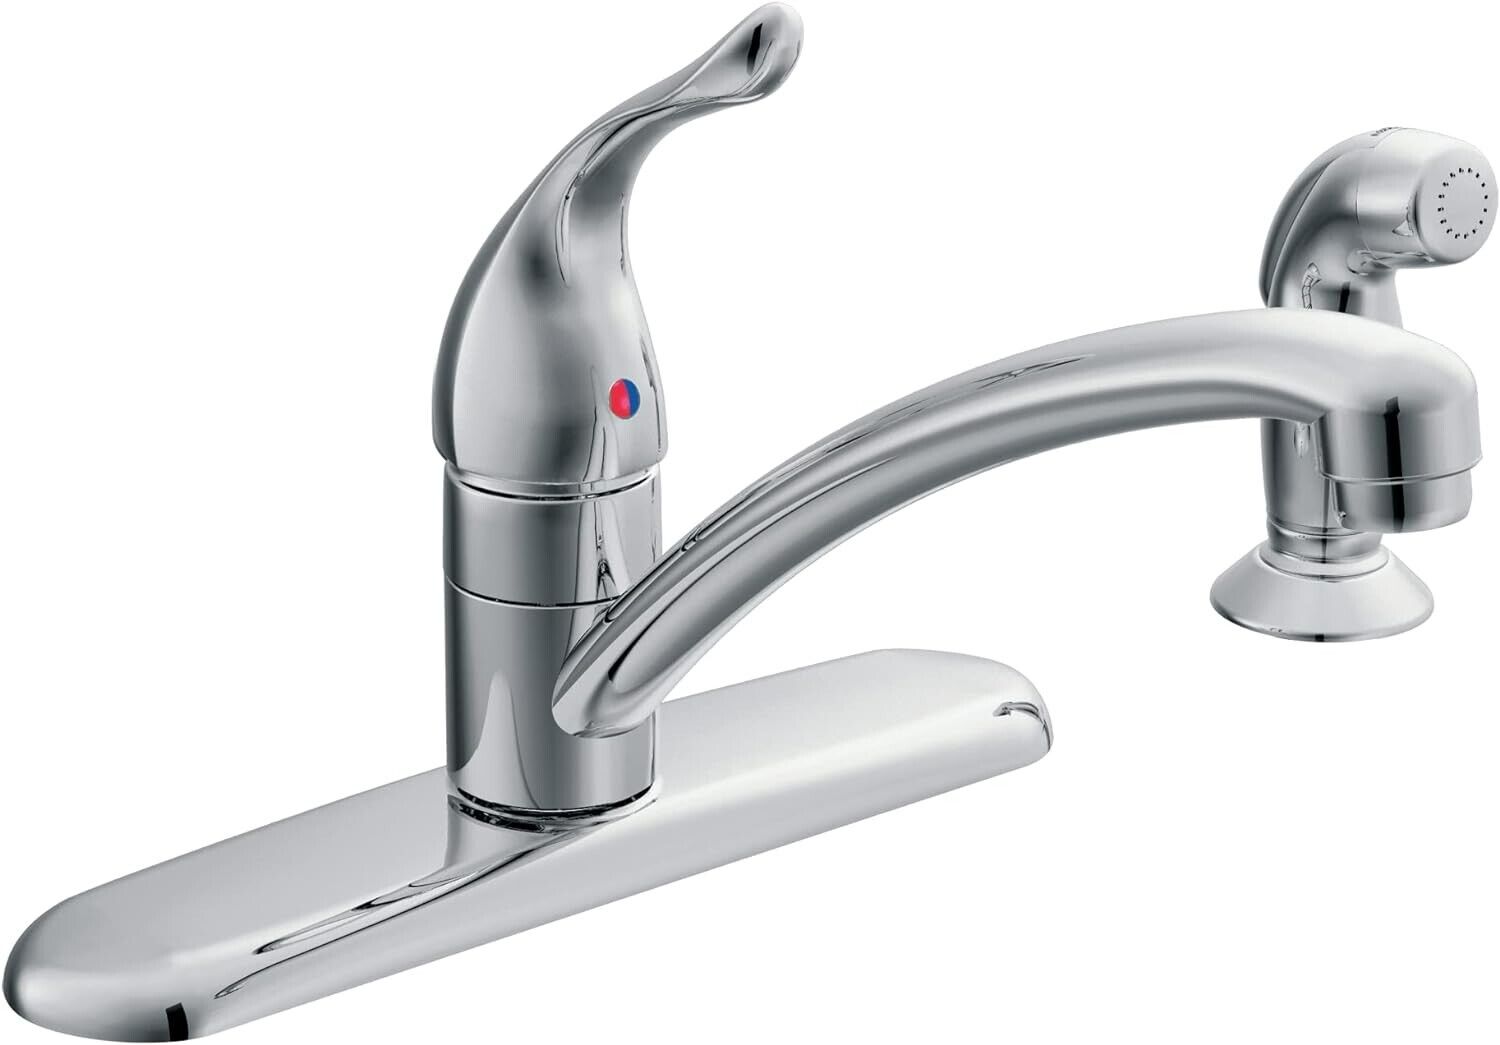 Moen 67430 Chateau Chrome One-Handle Kitchen Faucet with Protege Side Spray